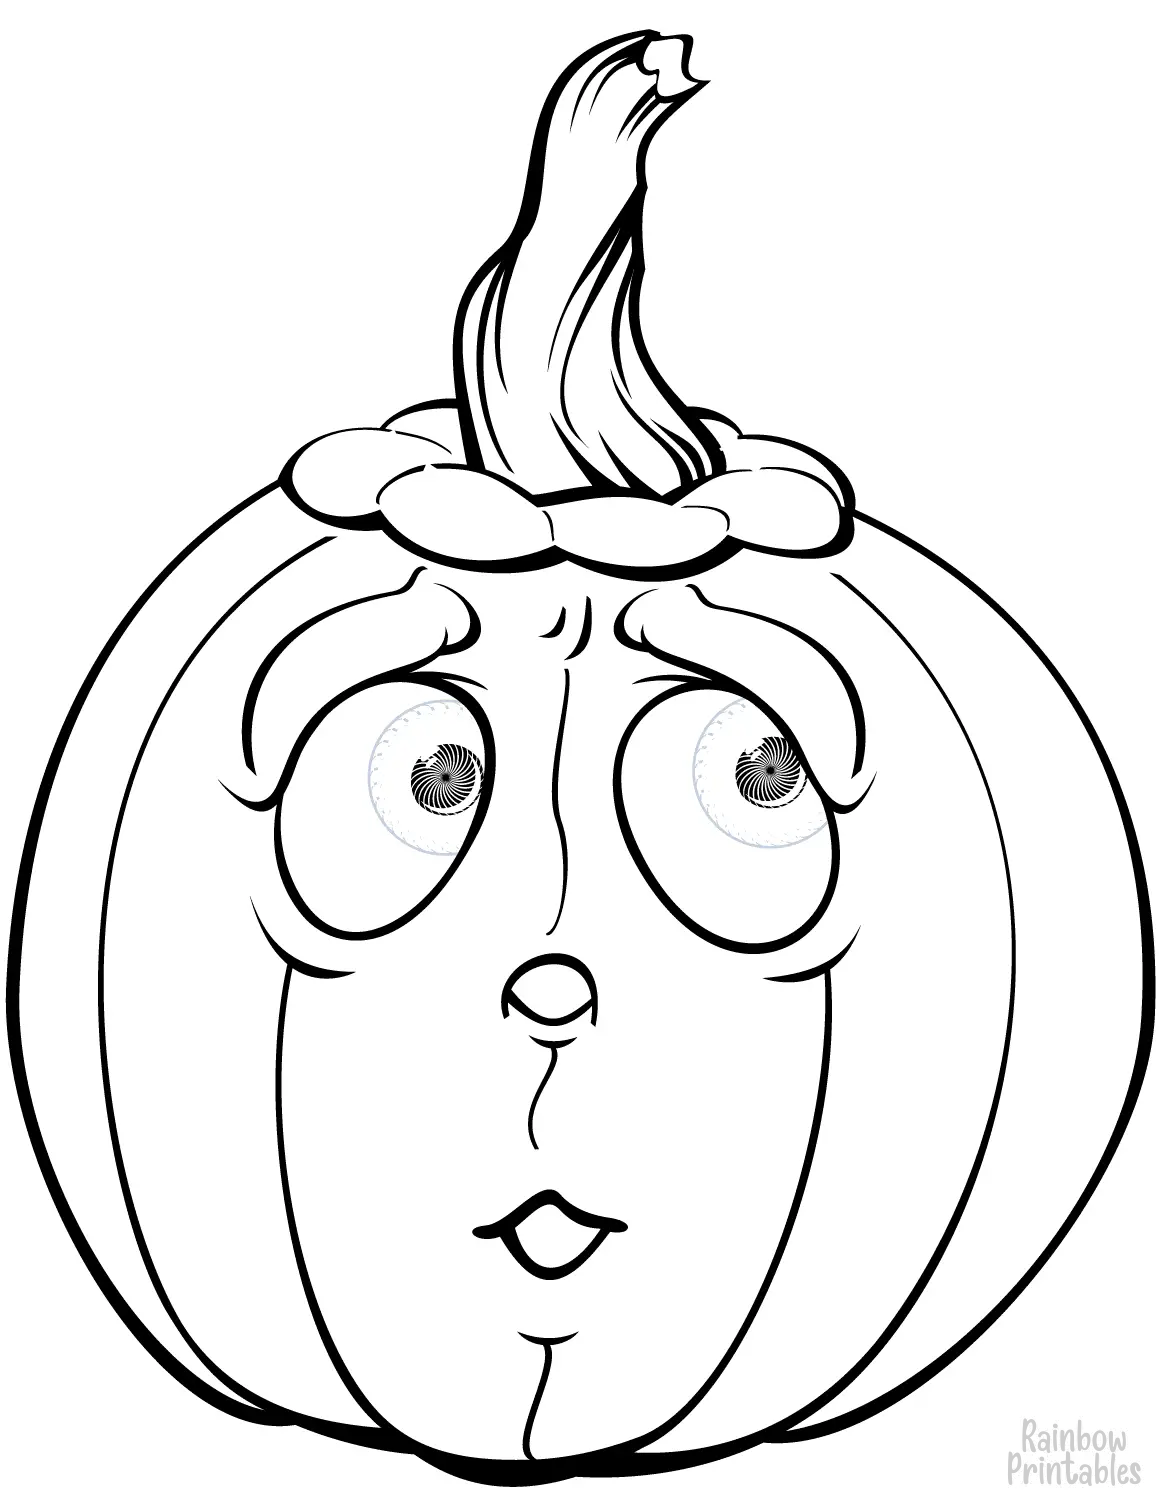 SCARED FRIGHTENING Pumpkin Halloween Line Art Drawing Set Free Activity Coloring Pages for Kids-02